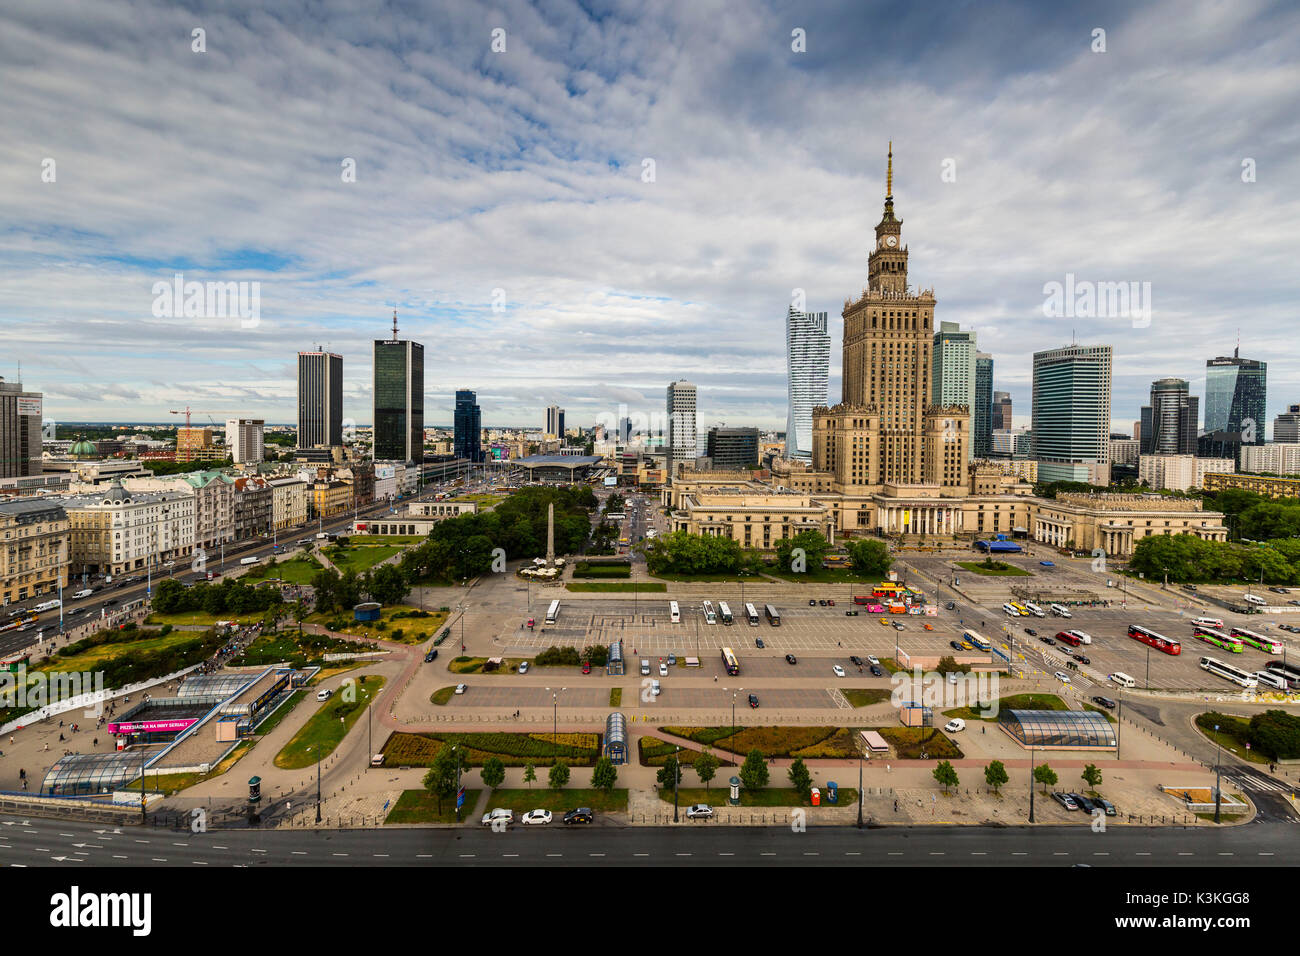 Europe, Poland, Mazovia, Warsaw. The capital and largest city of Poland. Palace of Culture and Science Stock Photo